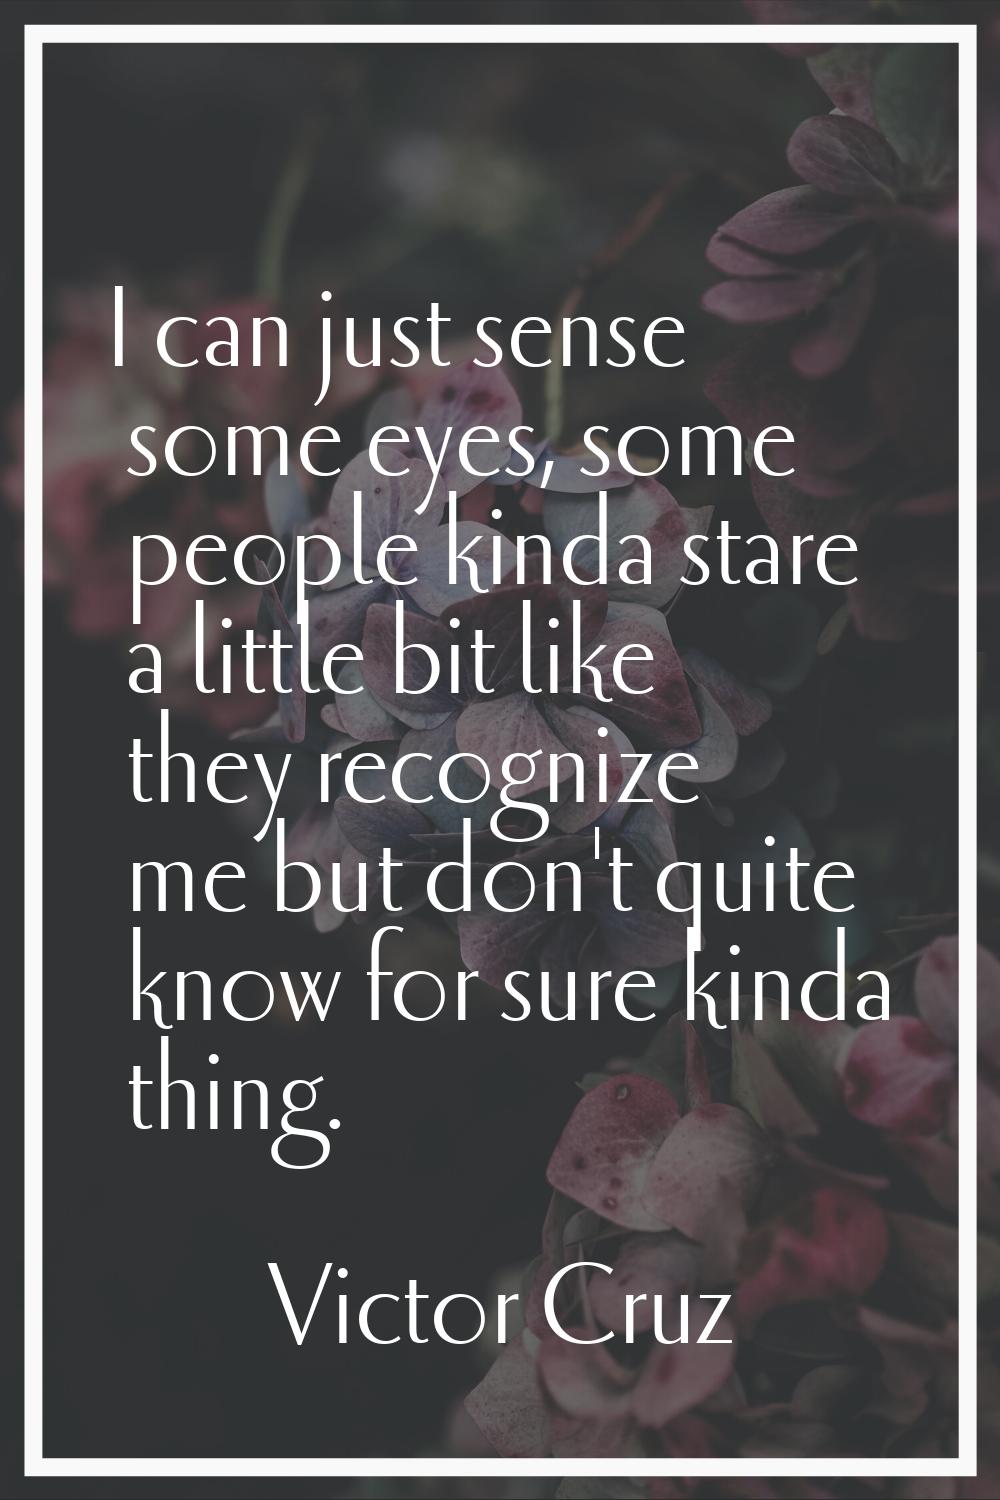 I can just sense some eyes, some people kinda stare a little bit like they recognize me but don't q